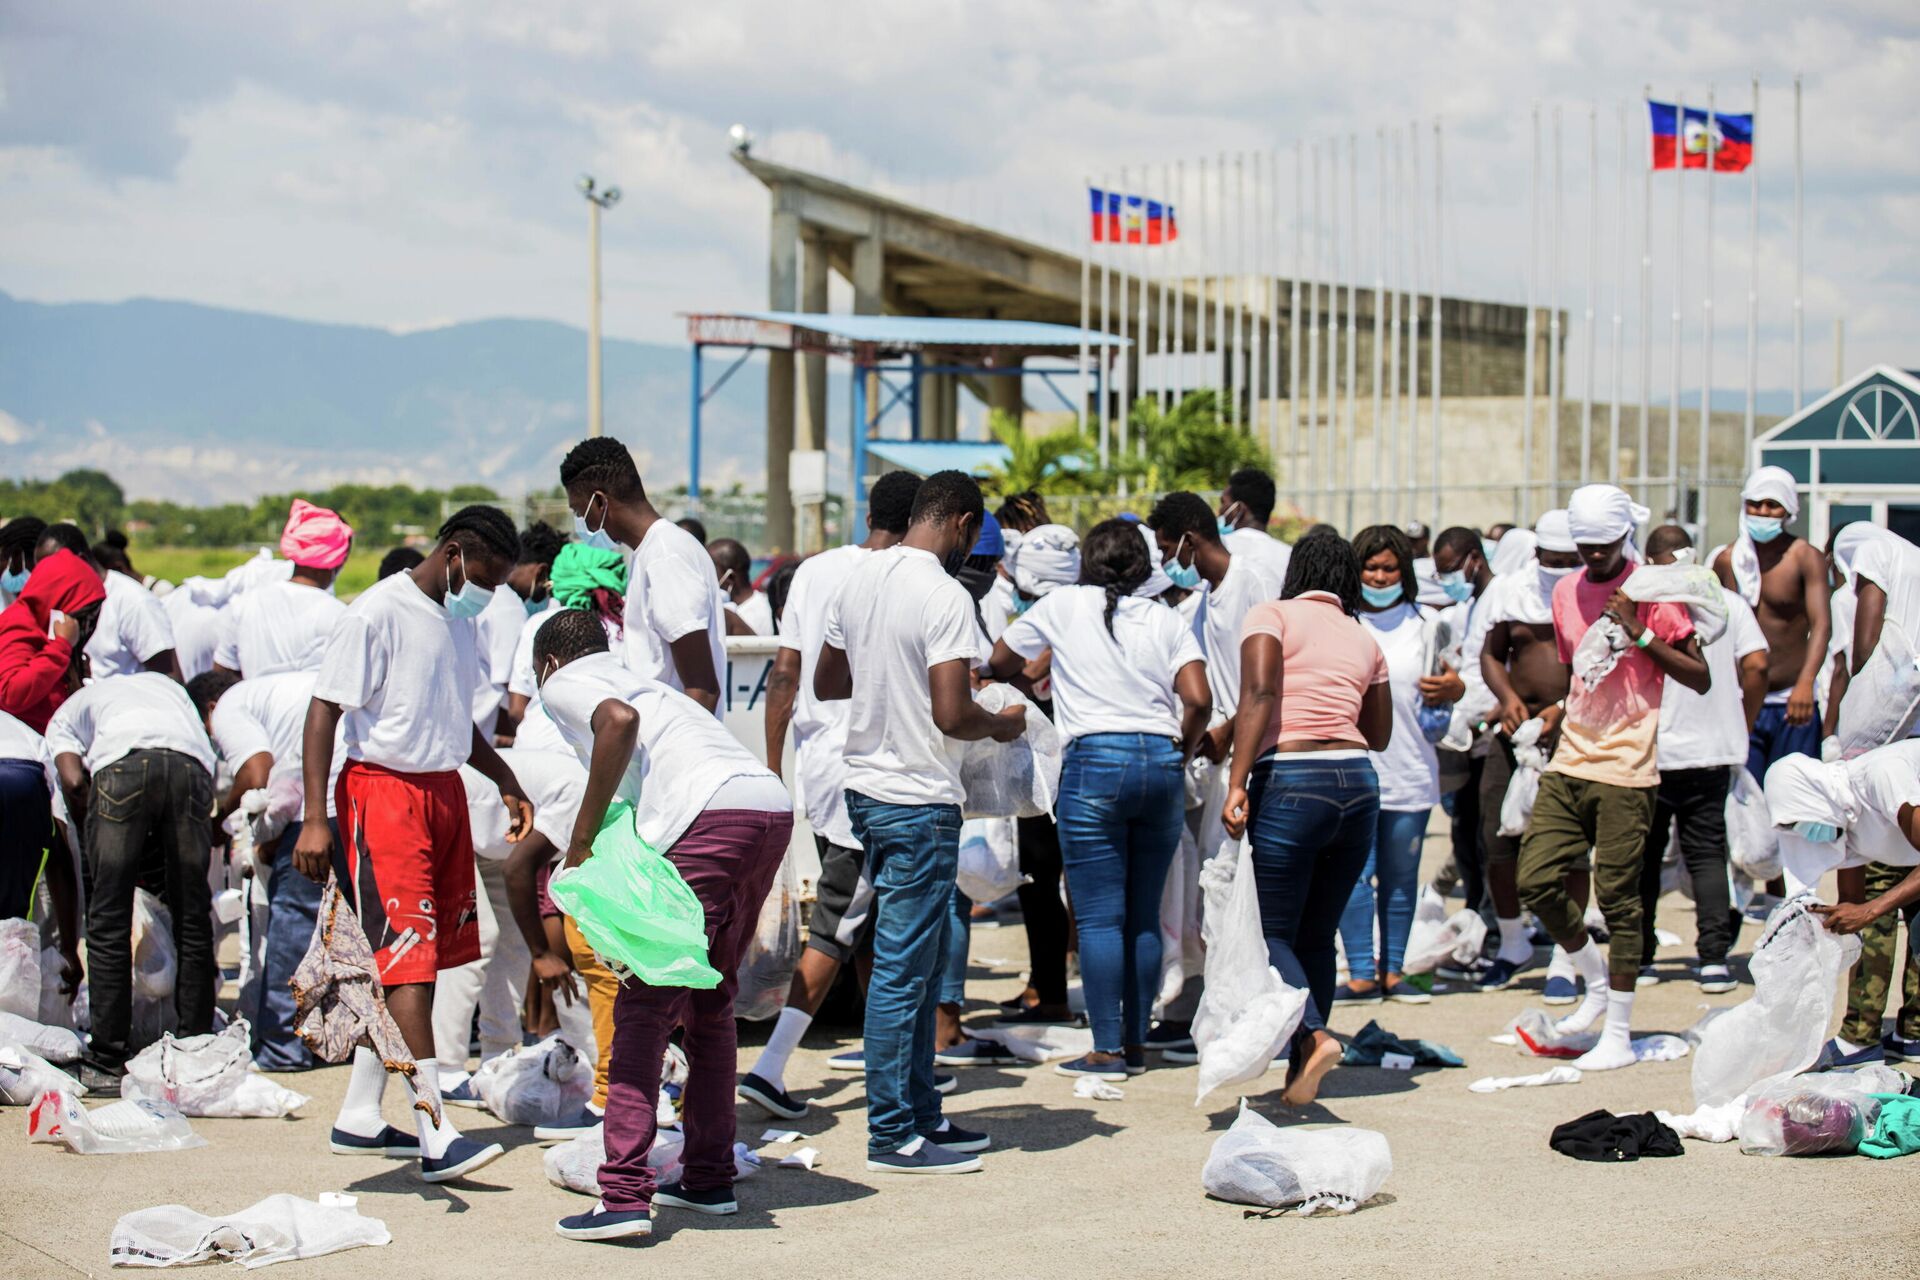 Haitian migrants collect their belongings after U.S. authorities flew them out of a Texas border city after crossing the Rio Grande river from Mexico, at Toussaint Louverture International Airport in Port-au-Prince, Haiti September 21, 2021 - Sputnik International, 1920, 22.09.2021